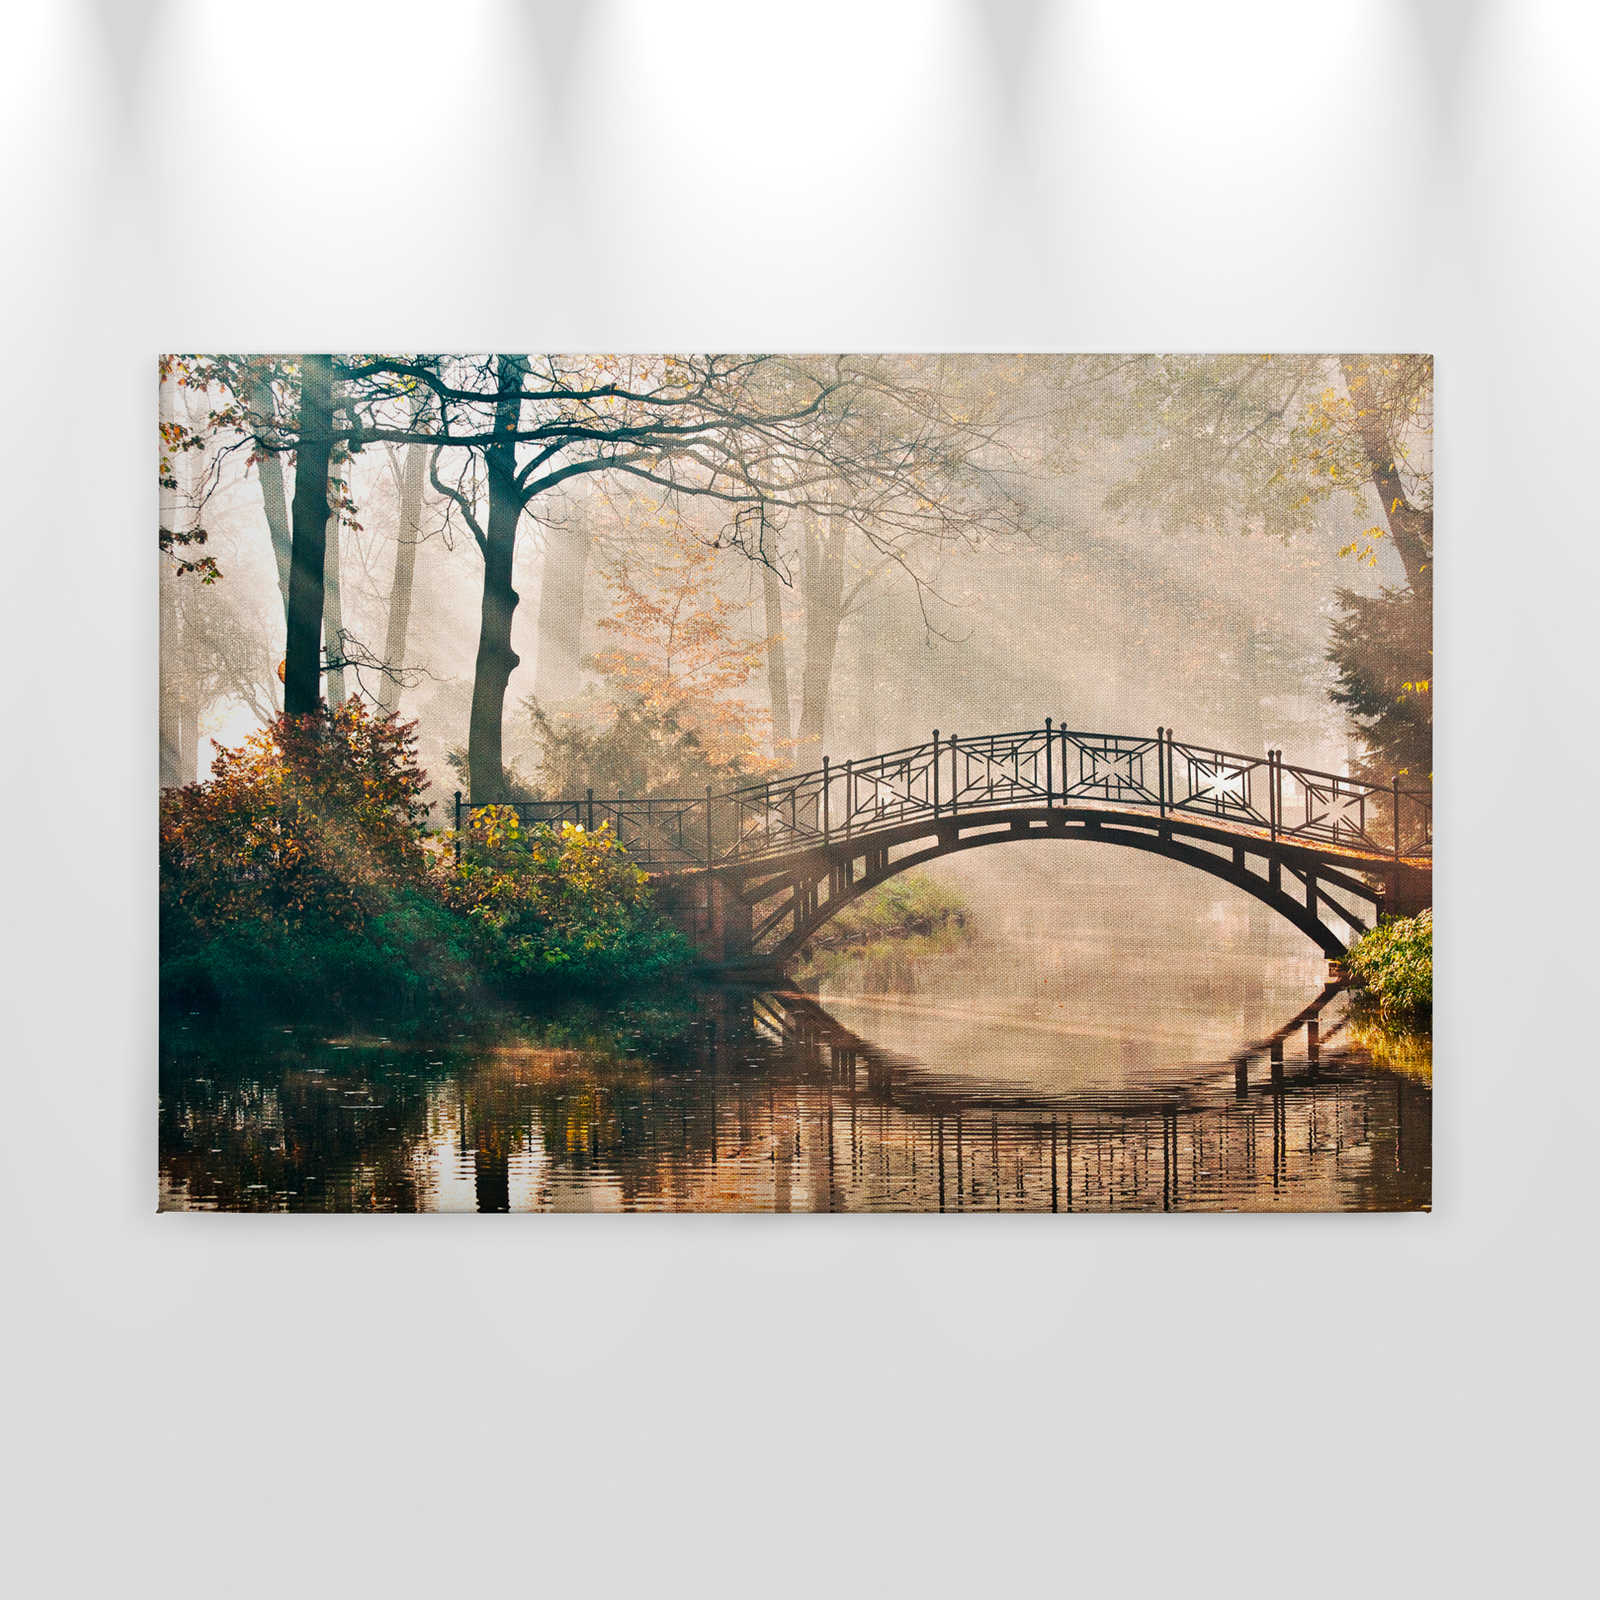             Canvas with bridge over a river in a deciduous forest - 0.90 m x 0.60 m
        